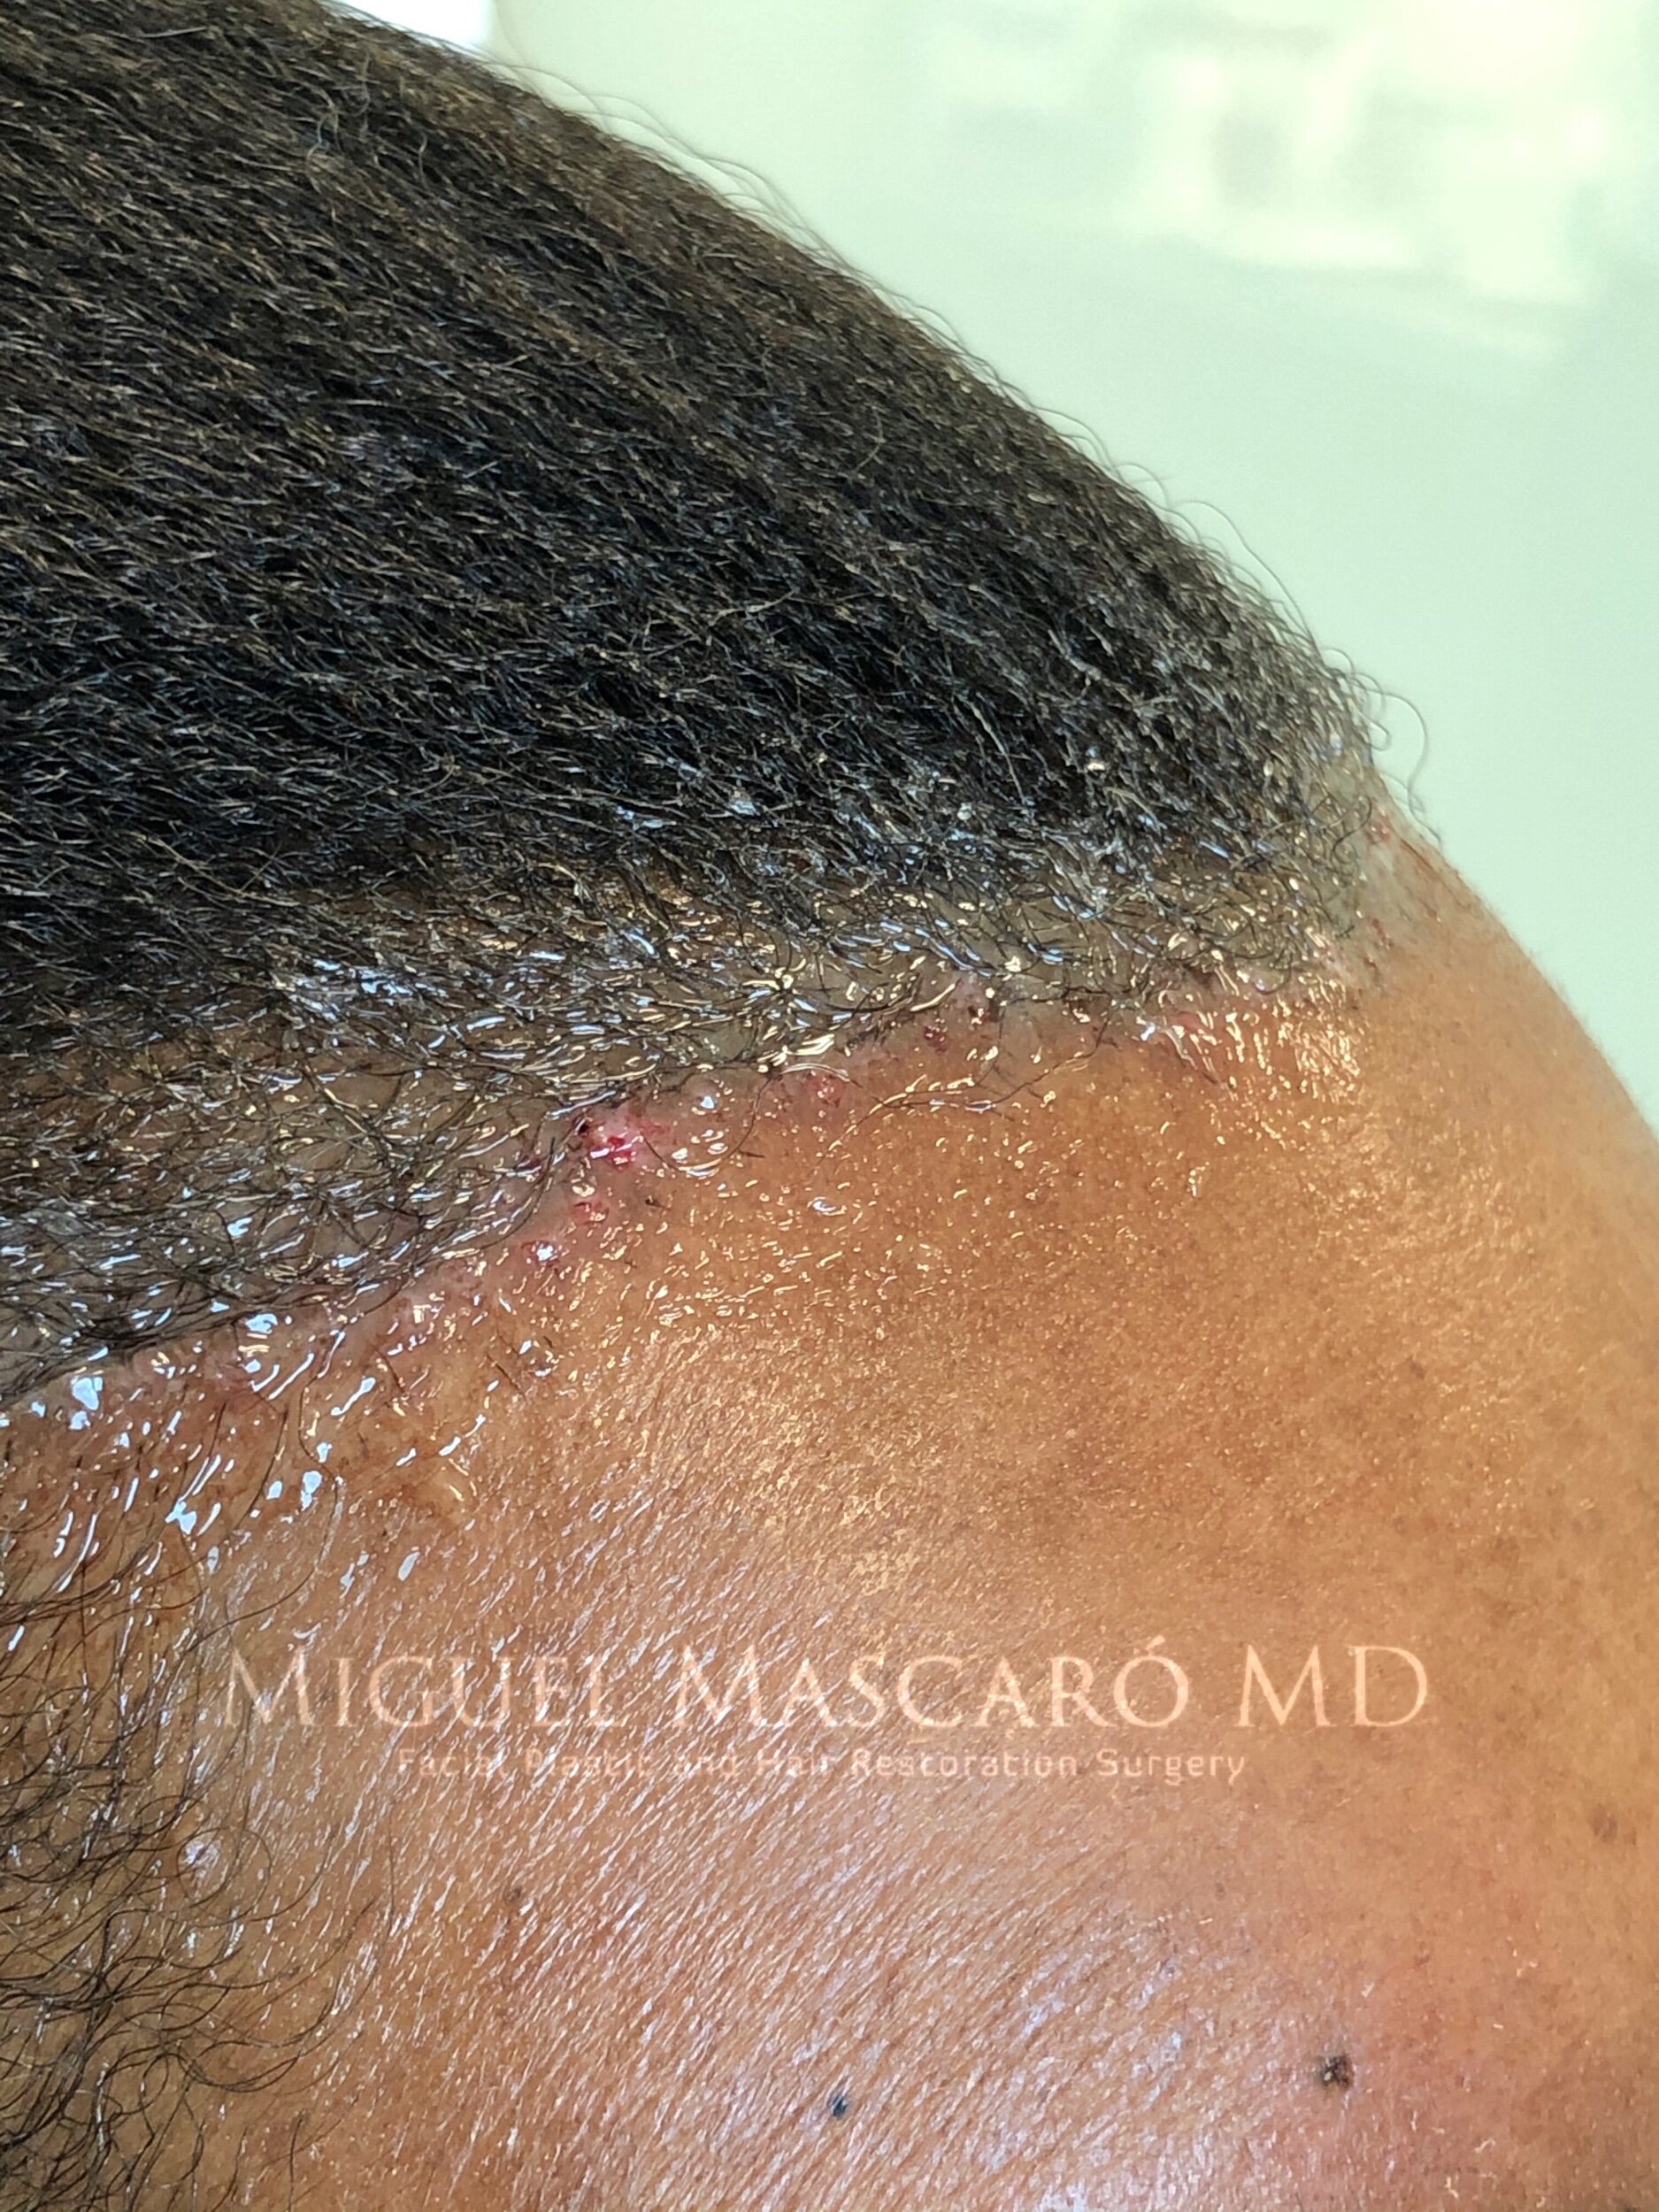  hairline incision at 7 days  